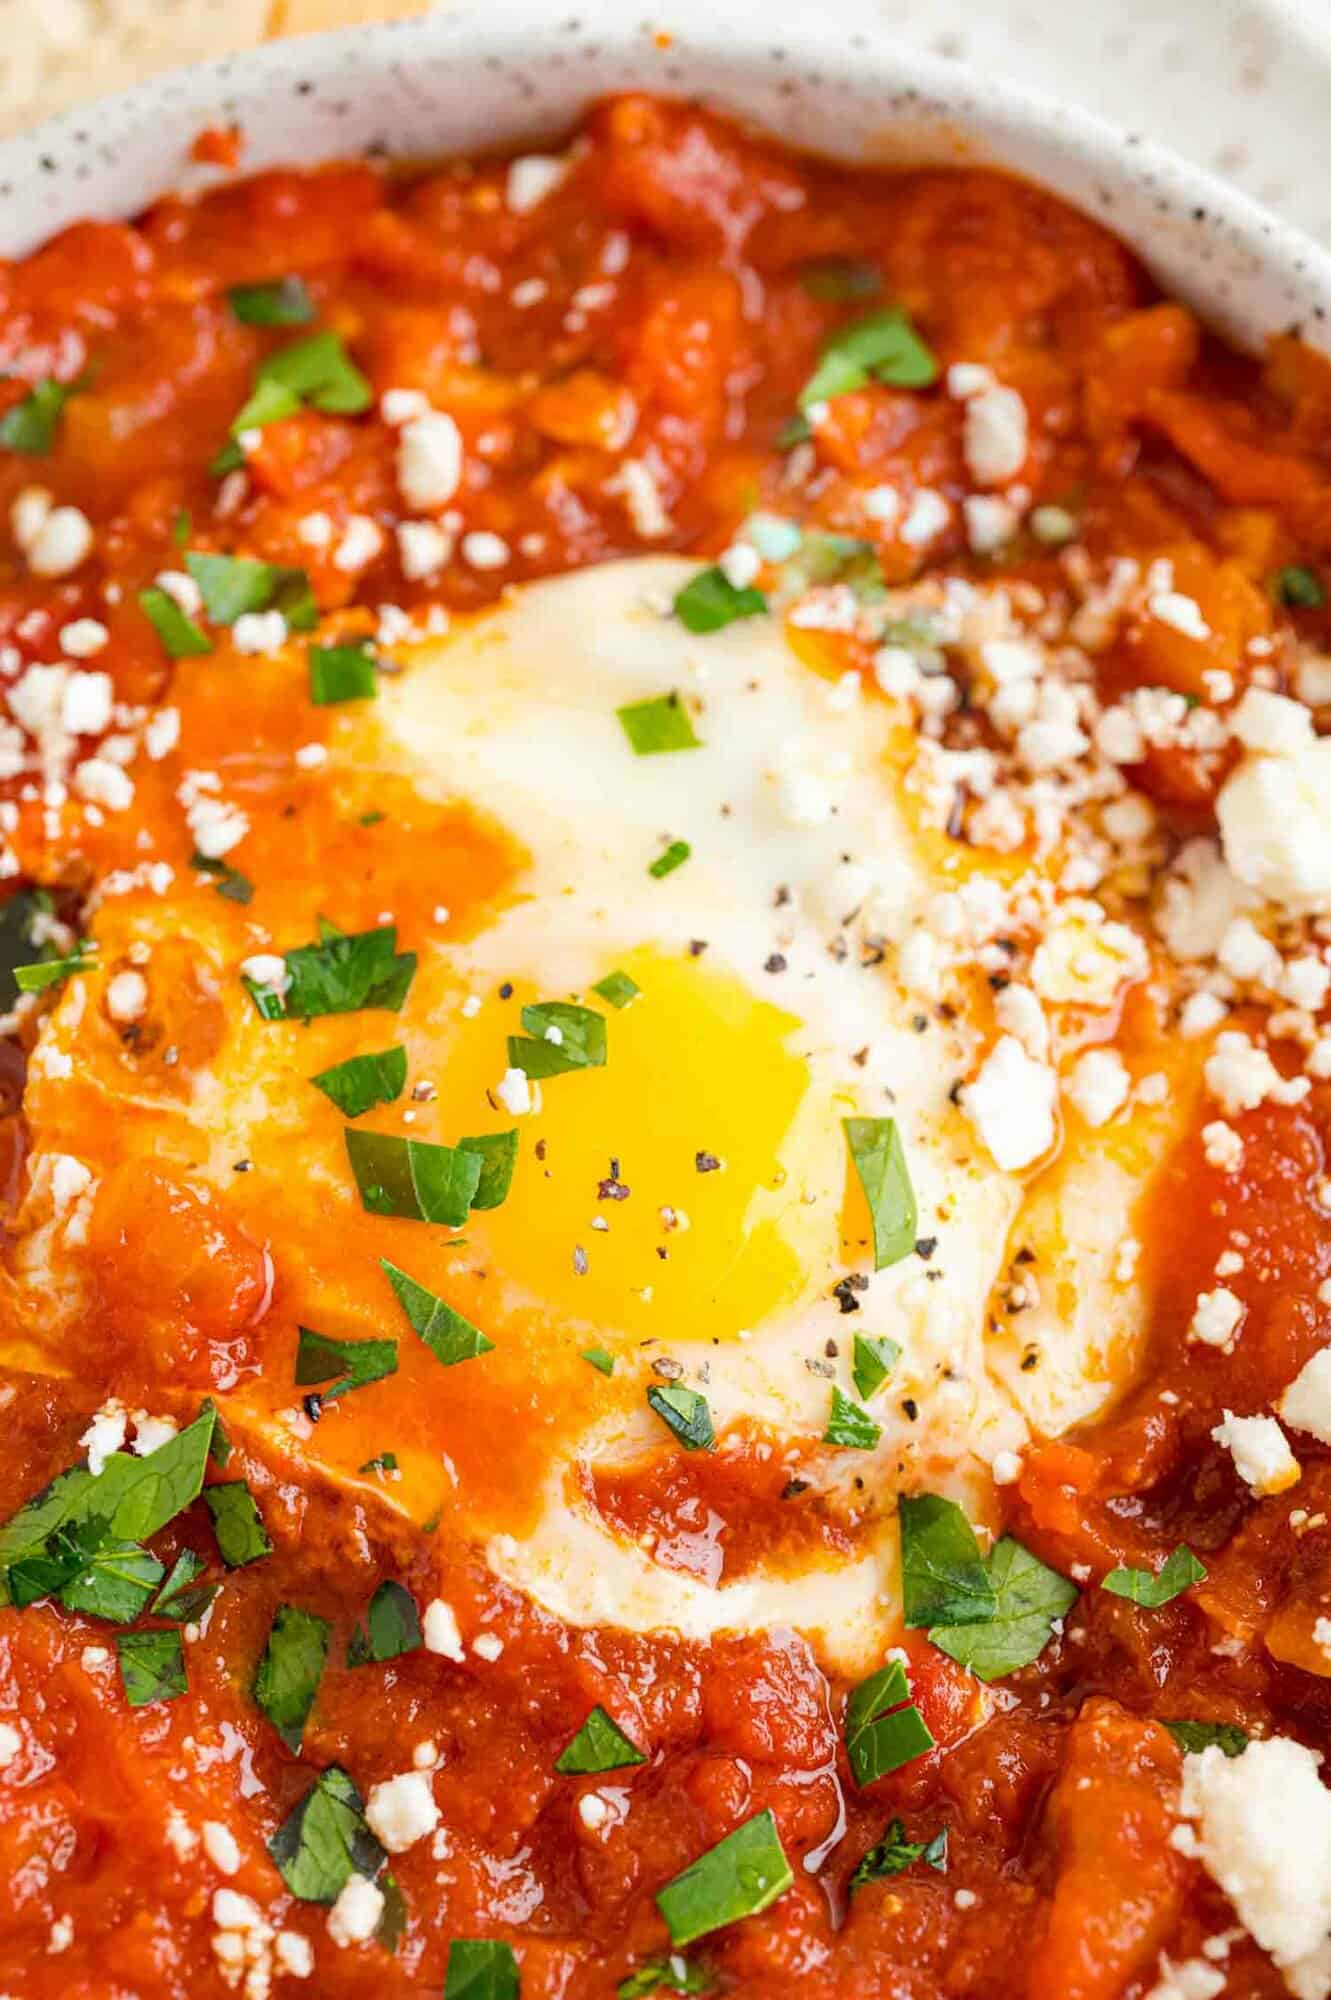 Close up view of a cooked egg in a tomato sauce topped with parsley.